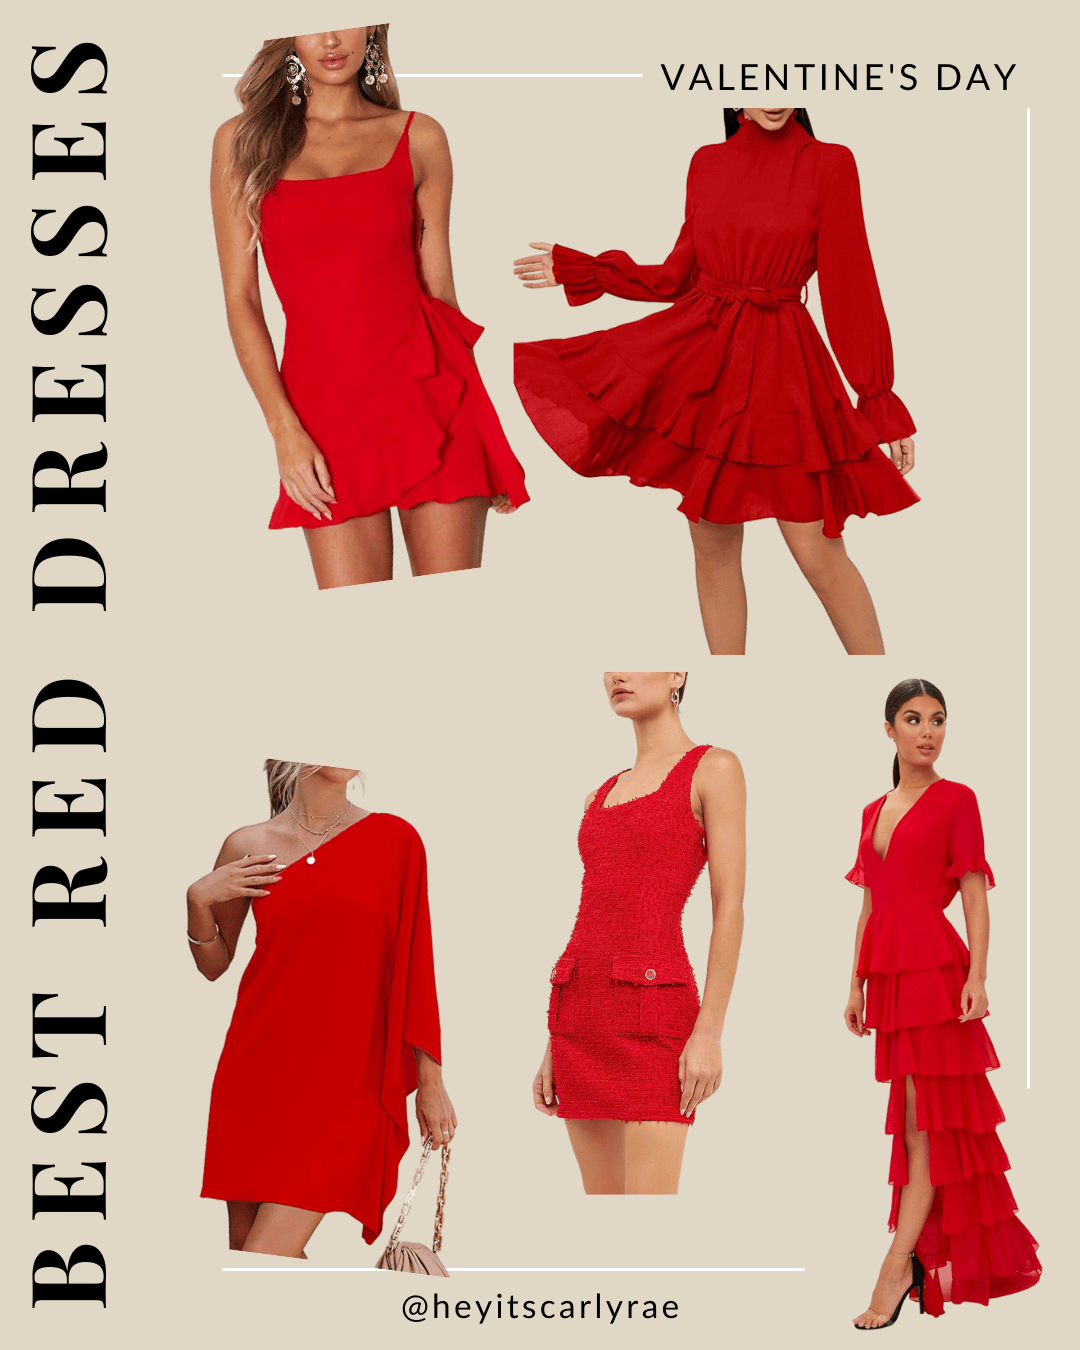 Red dresses for valentines day